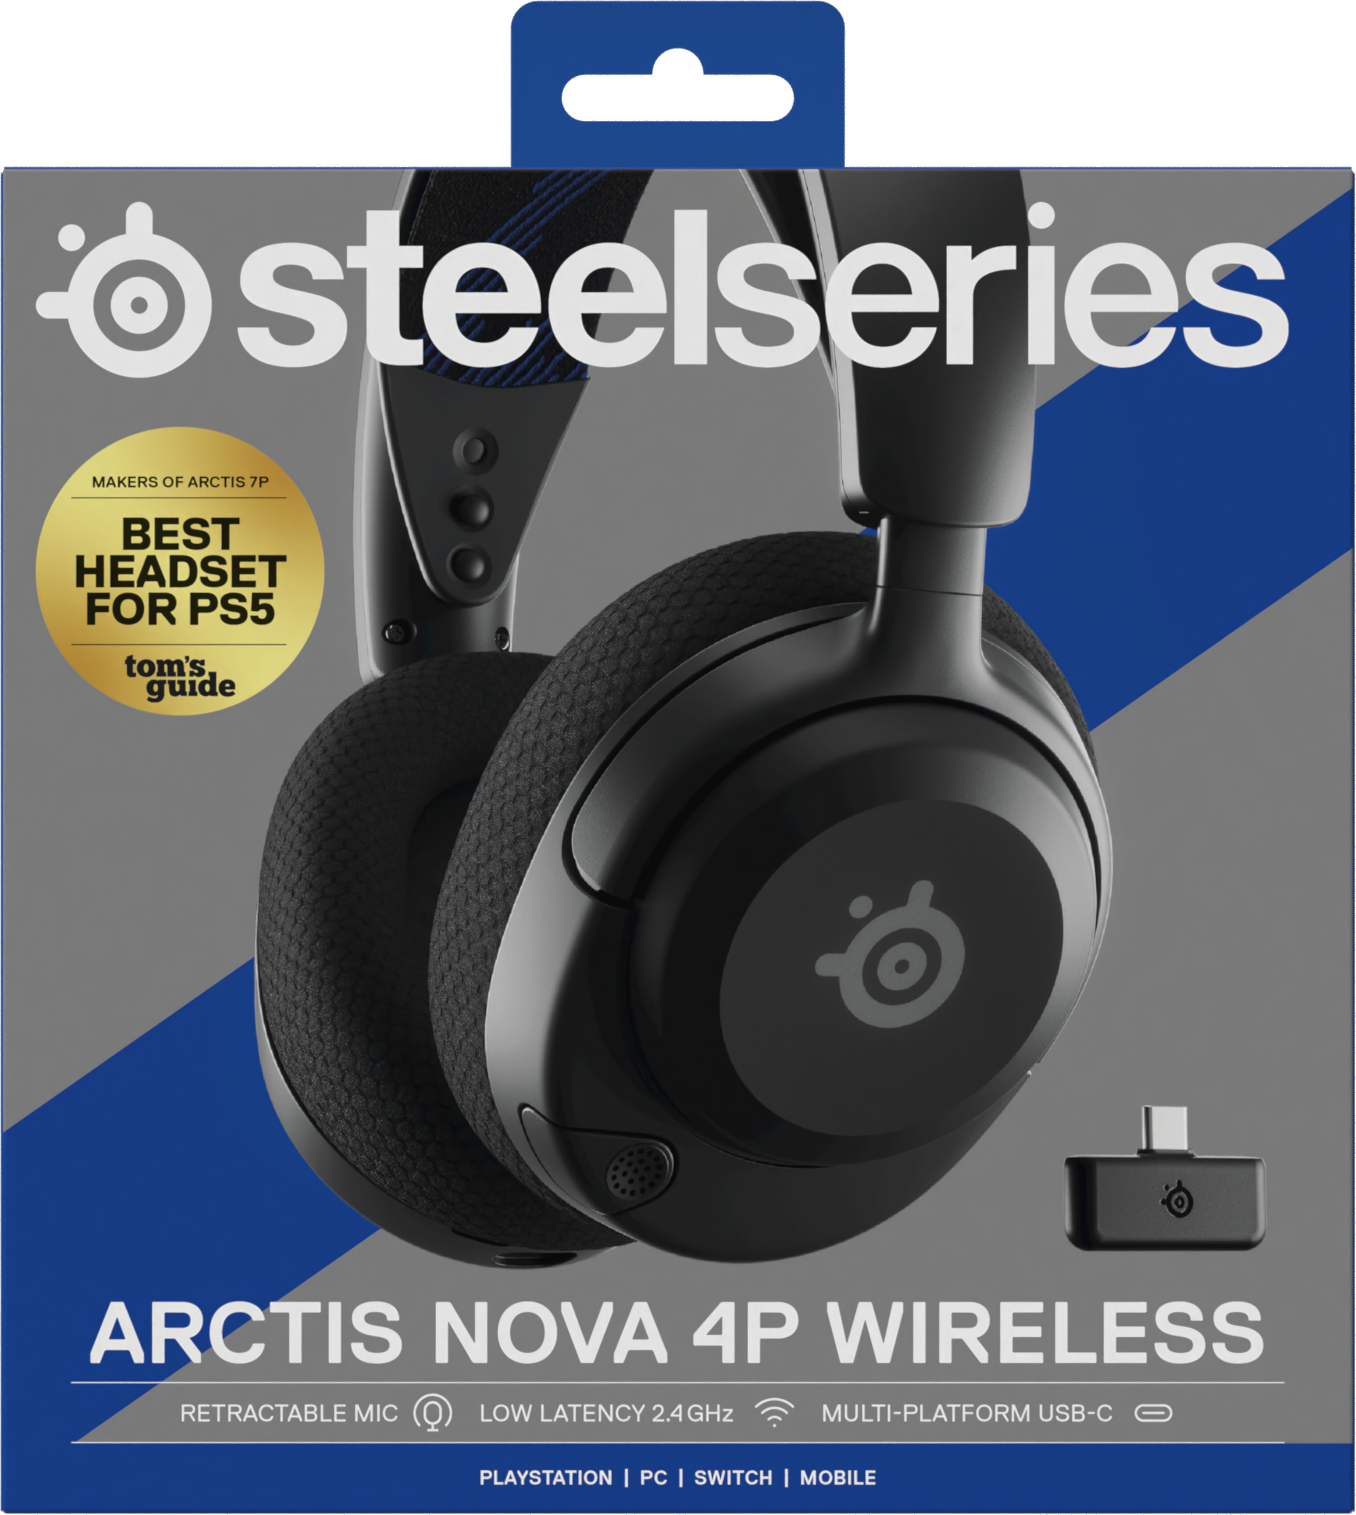 Wireless Meta Headset for Switch, 4P PlayStation Arctis Quest SteelSeries | 2, Nova GameStop Gaming PC,